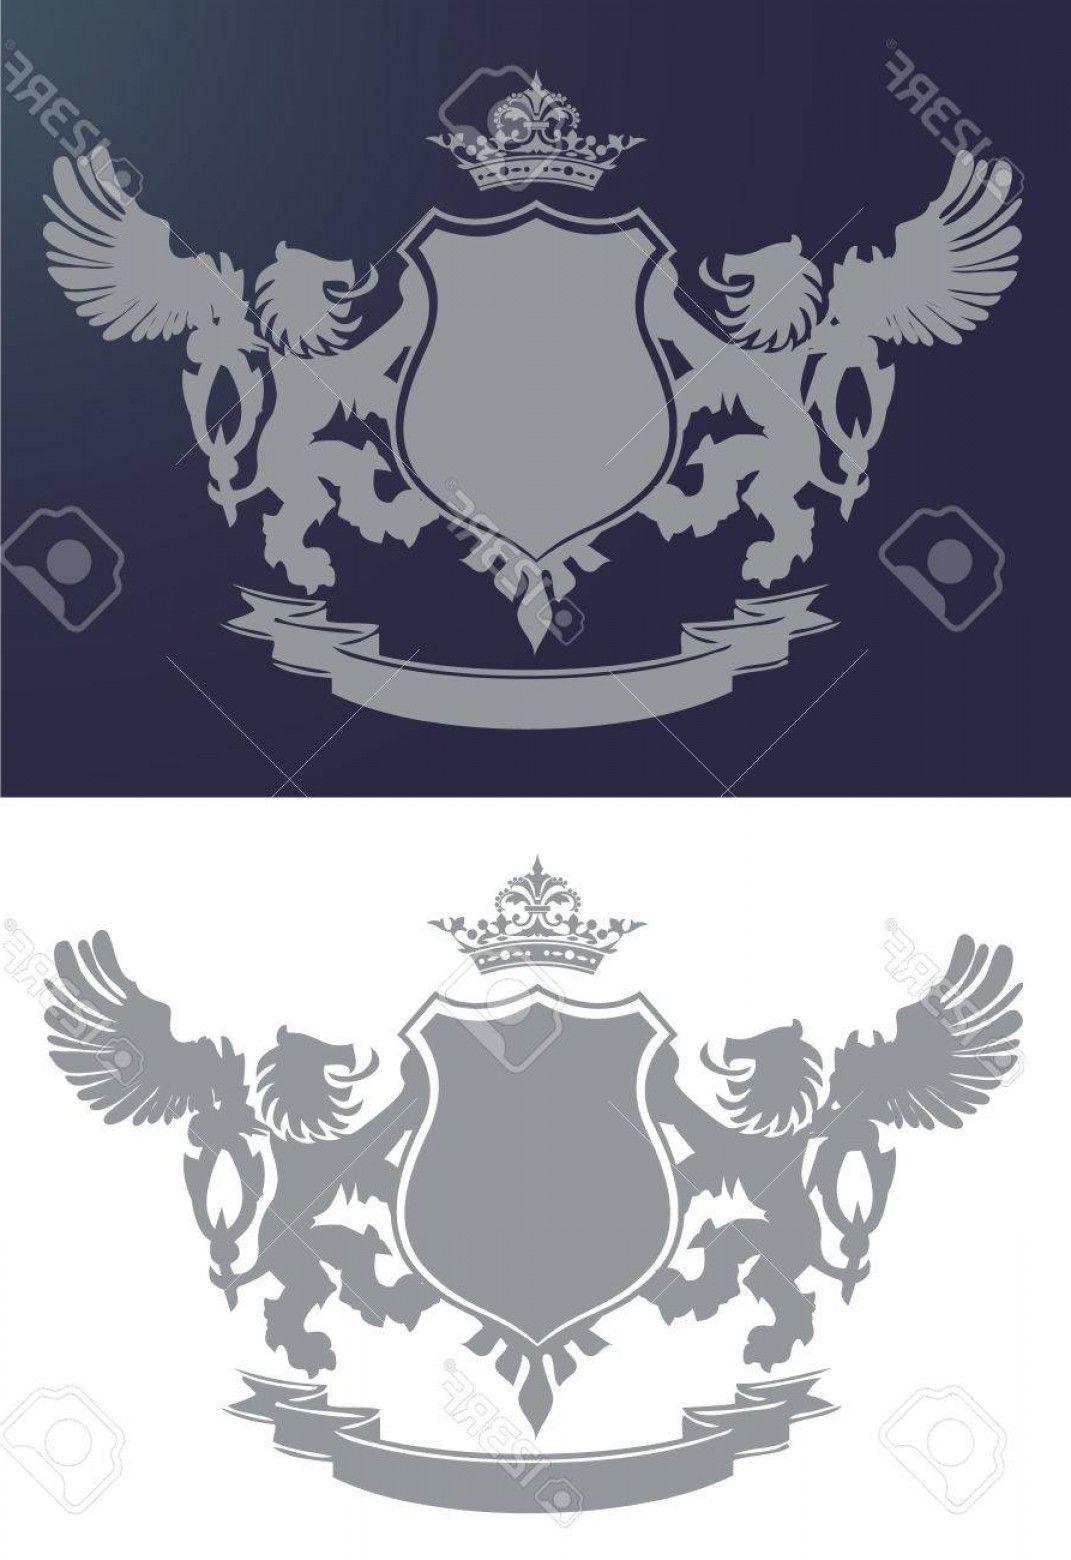 Two Lions Logo - Photostock Vector Royal Crest With Two Lions And Wings Crown And ...